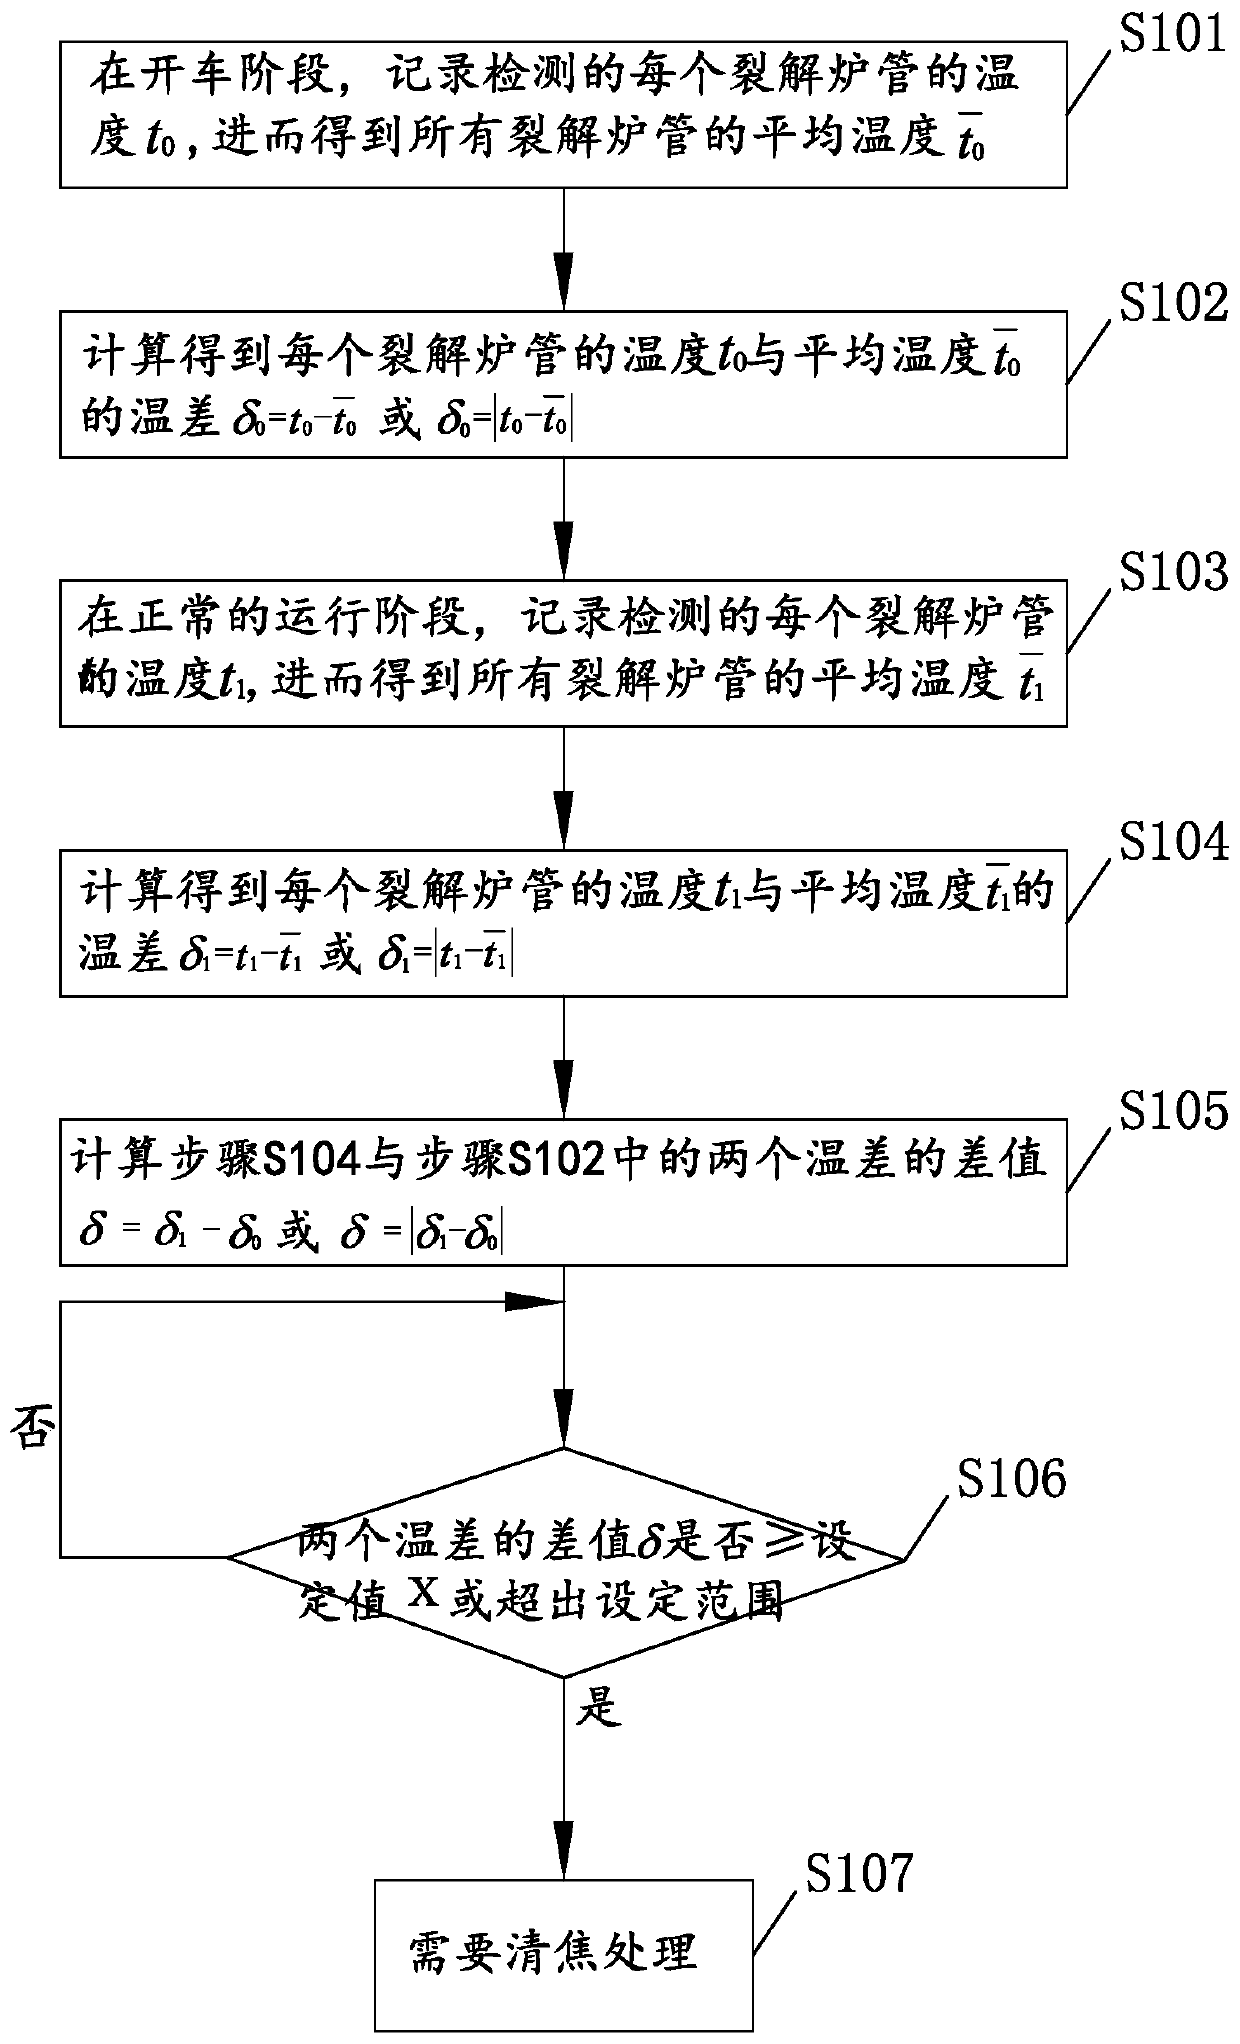 Operation monitoring method and system of heating furnace